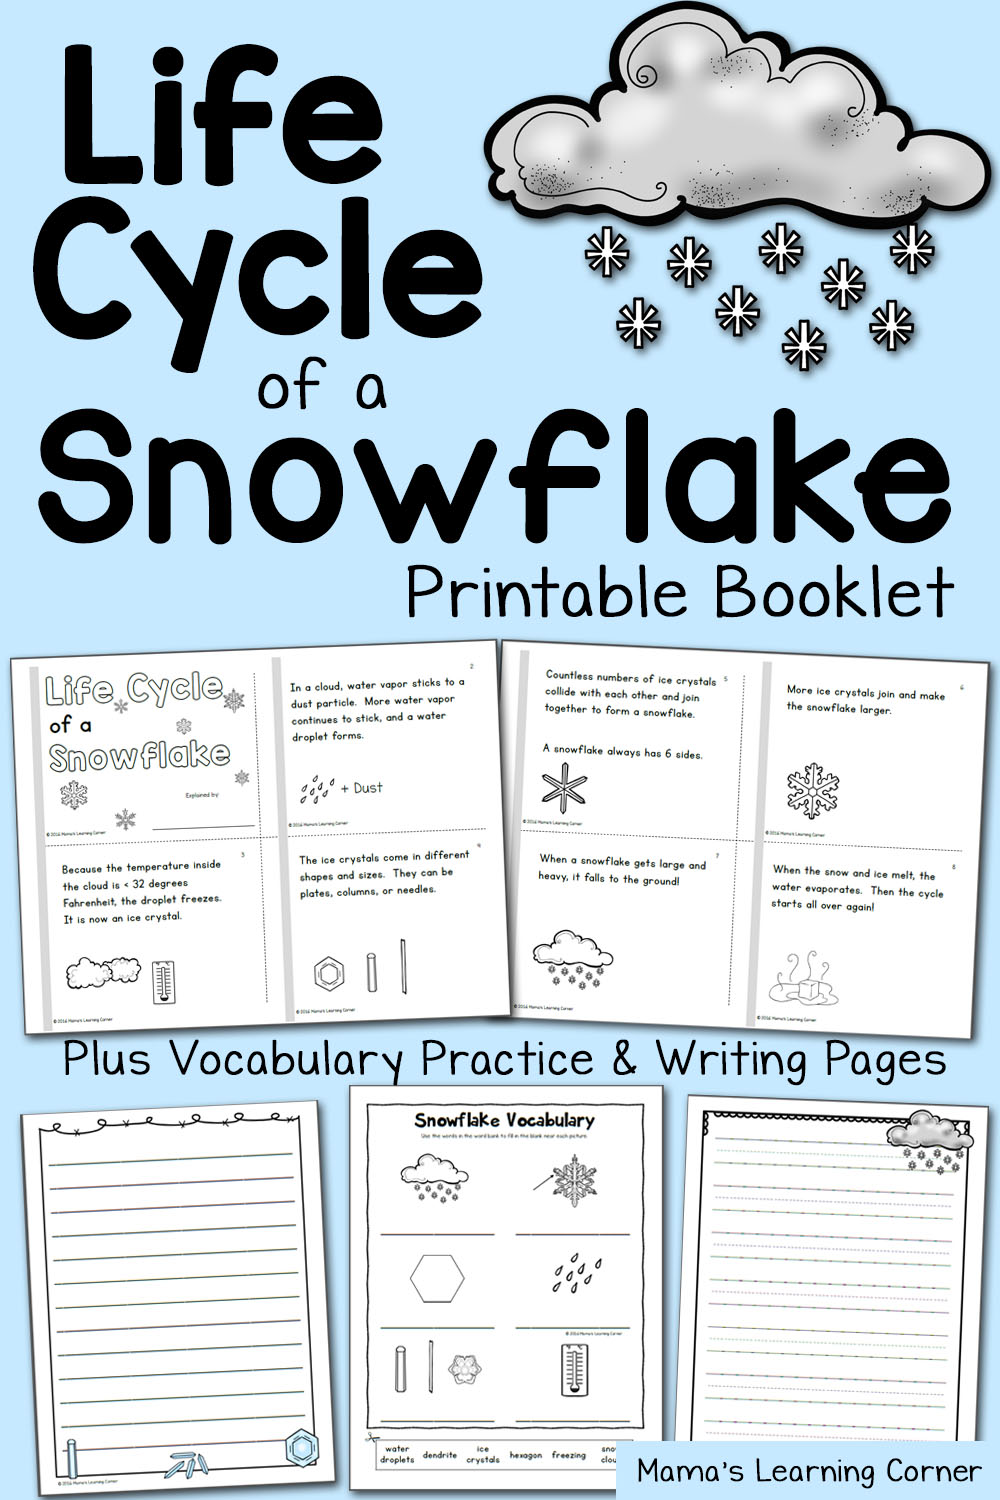 books easy kindergarten printable a Snowflake Cycle Mamas Life of Booklet Learning   Corner